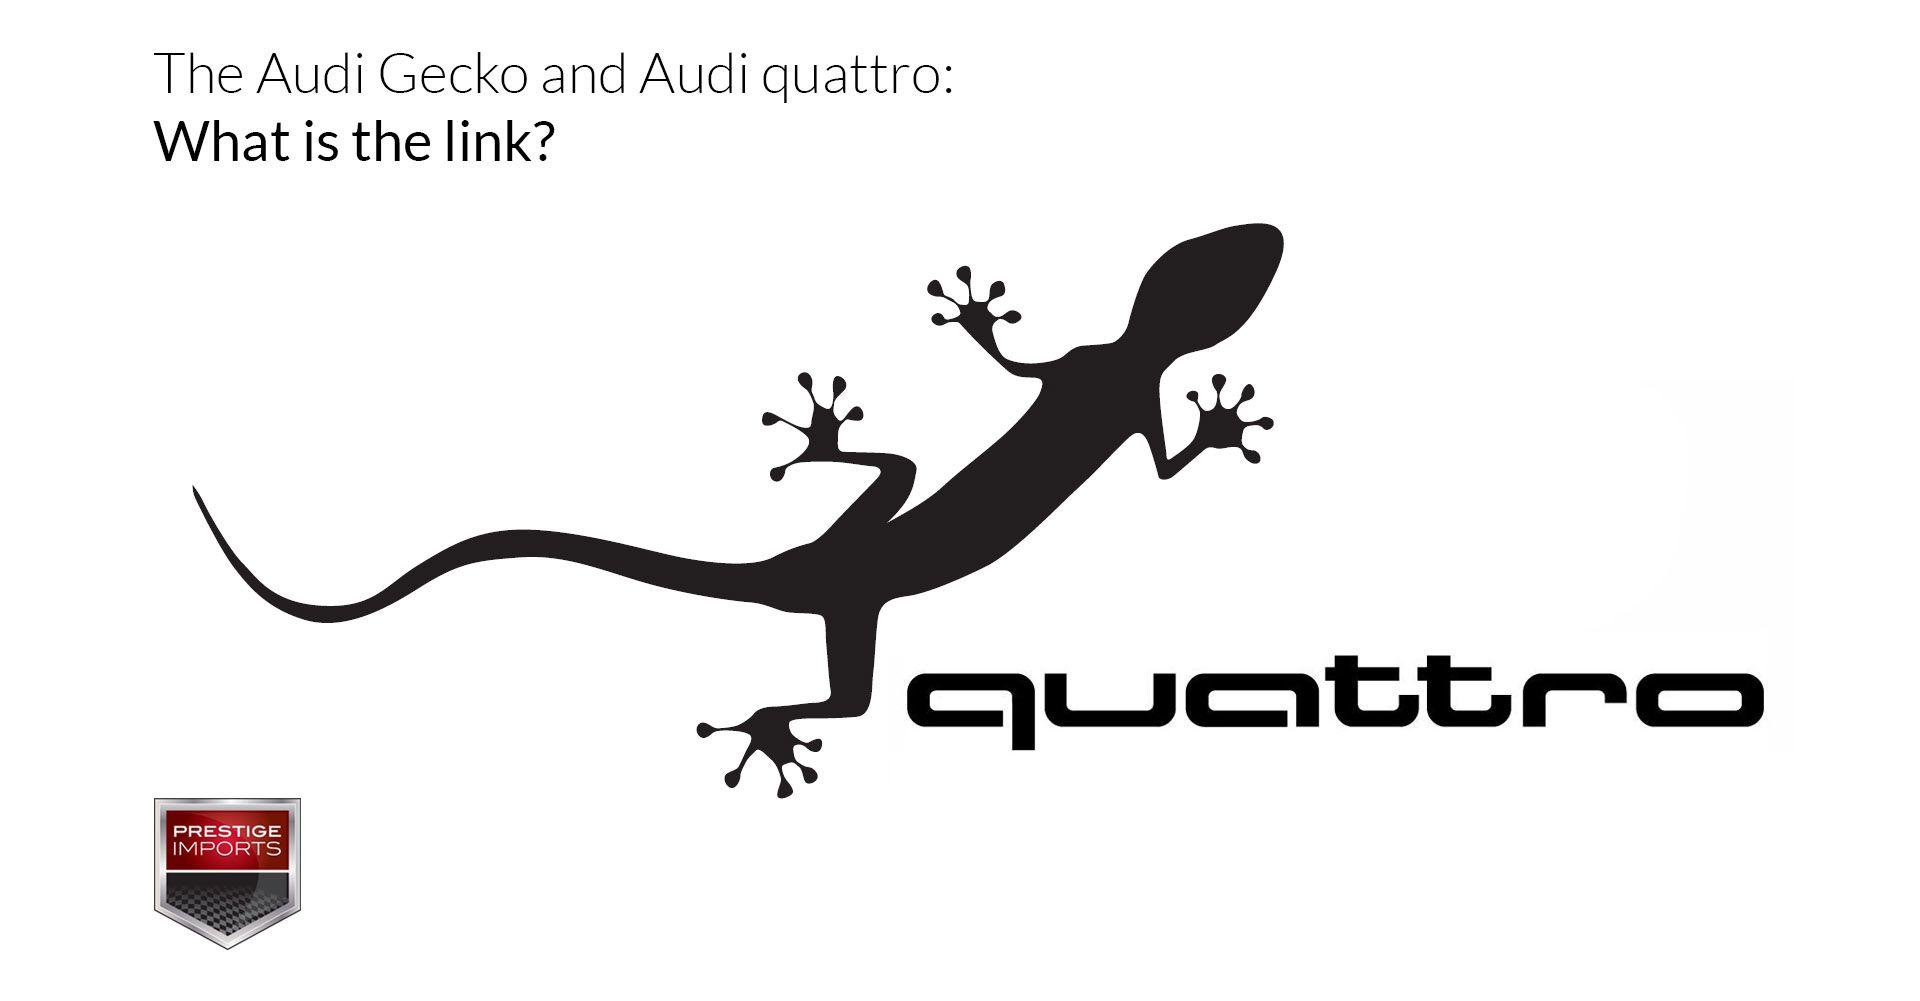 Lizard Logo - Audi gecko logo and Audi quattro: What is the link?